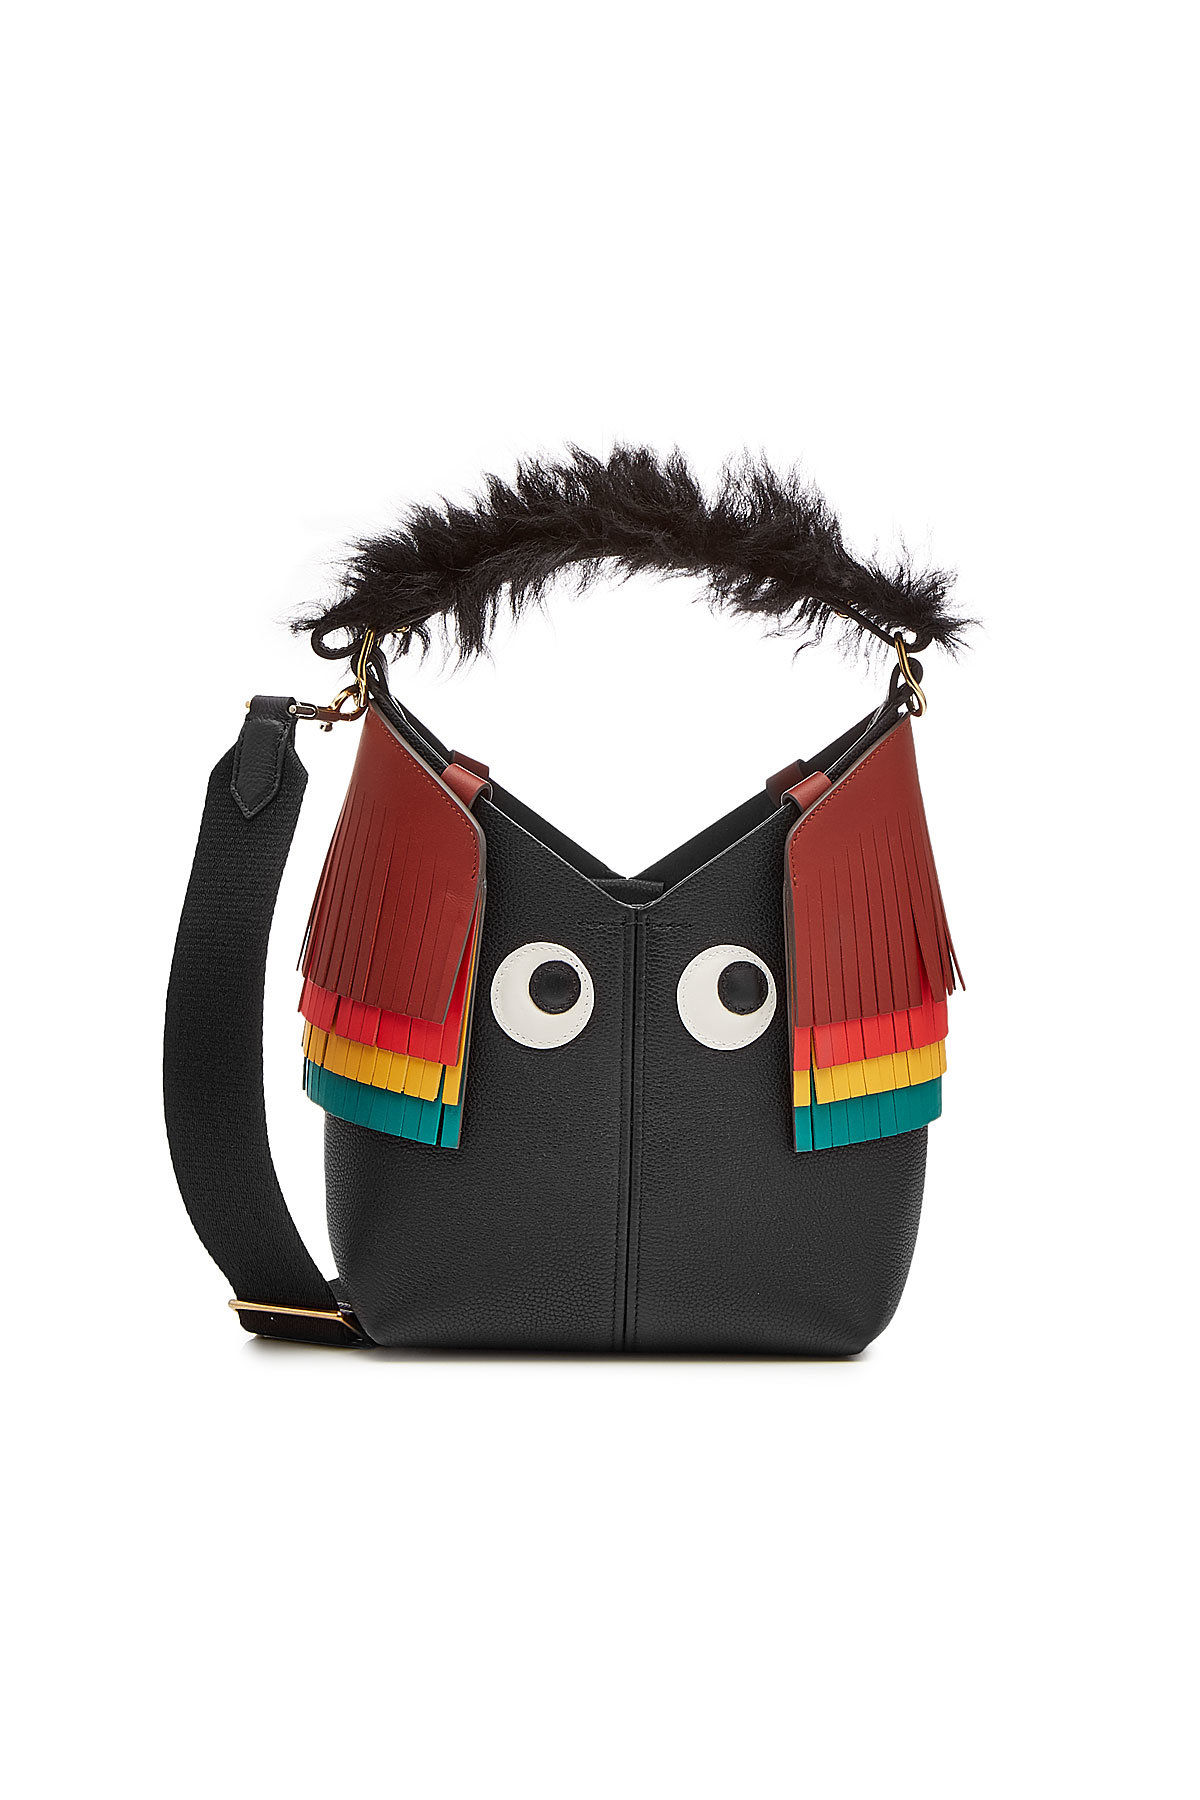 Mini Build A Bag Creature Leather Tote with Lamb Fur by Anya Hindmarch